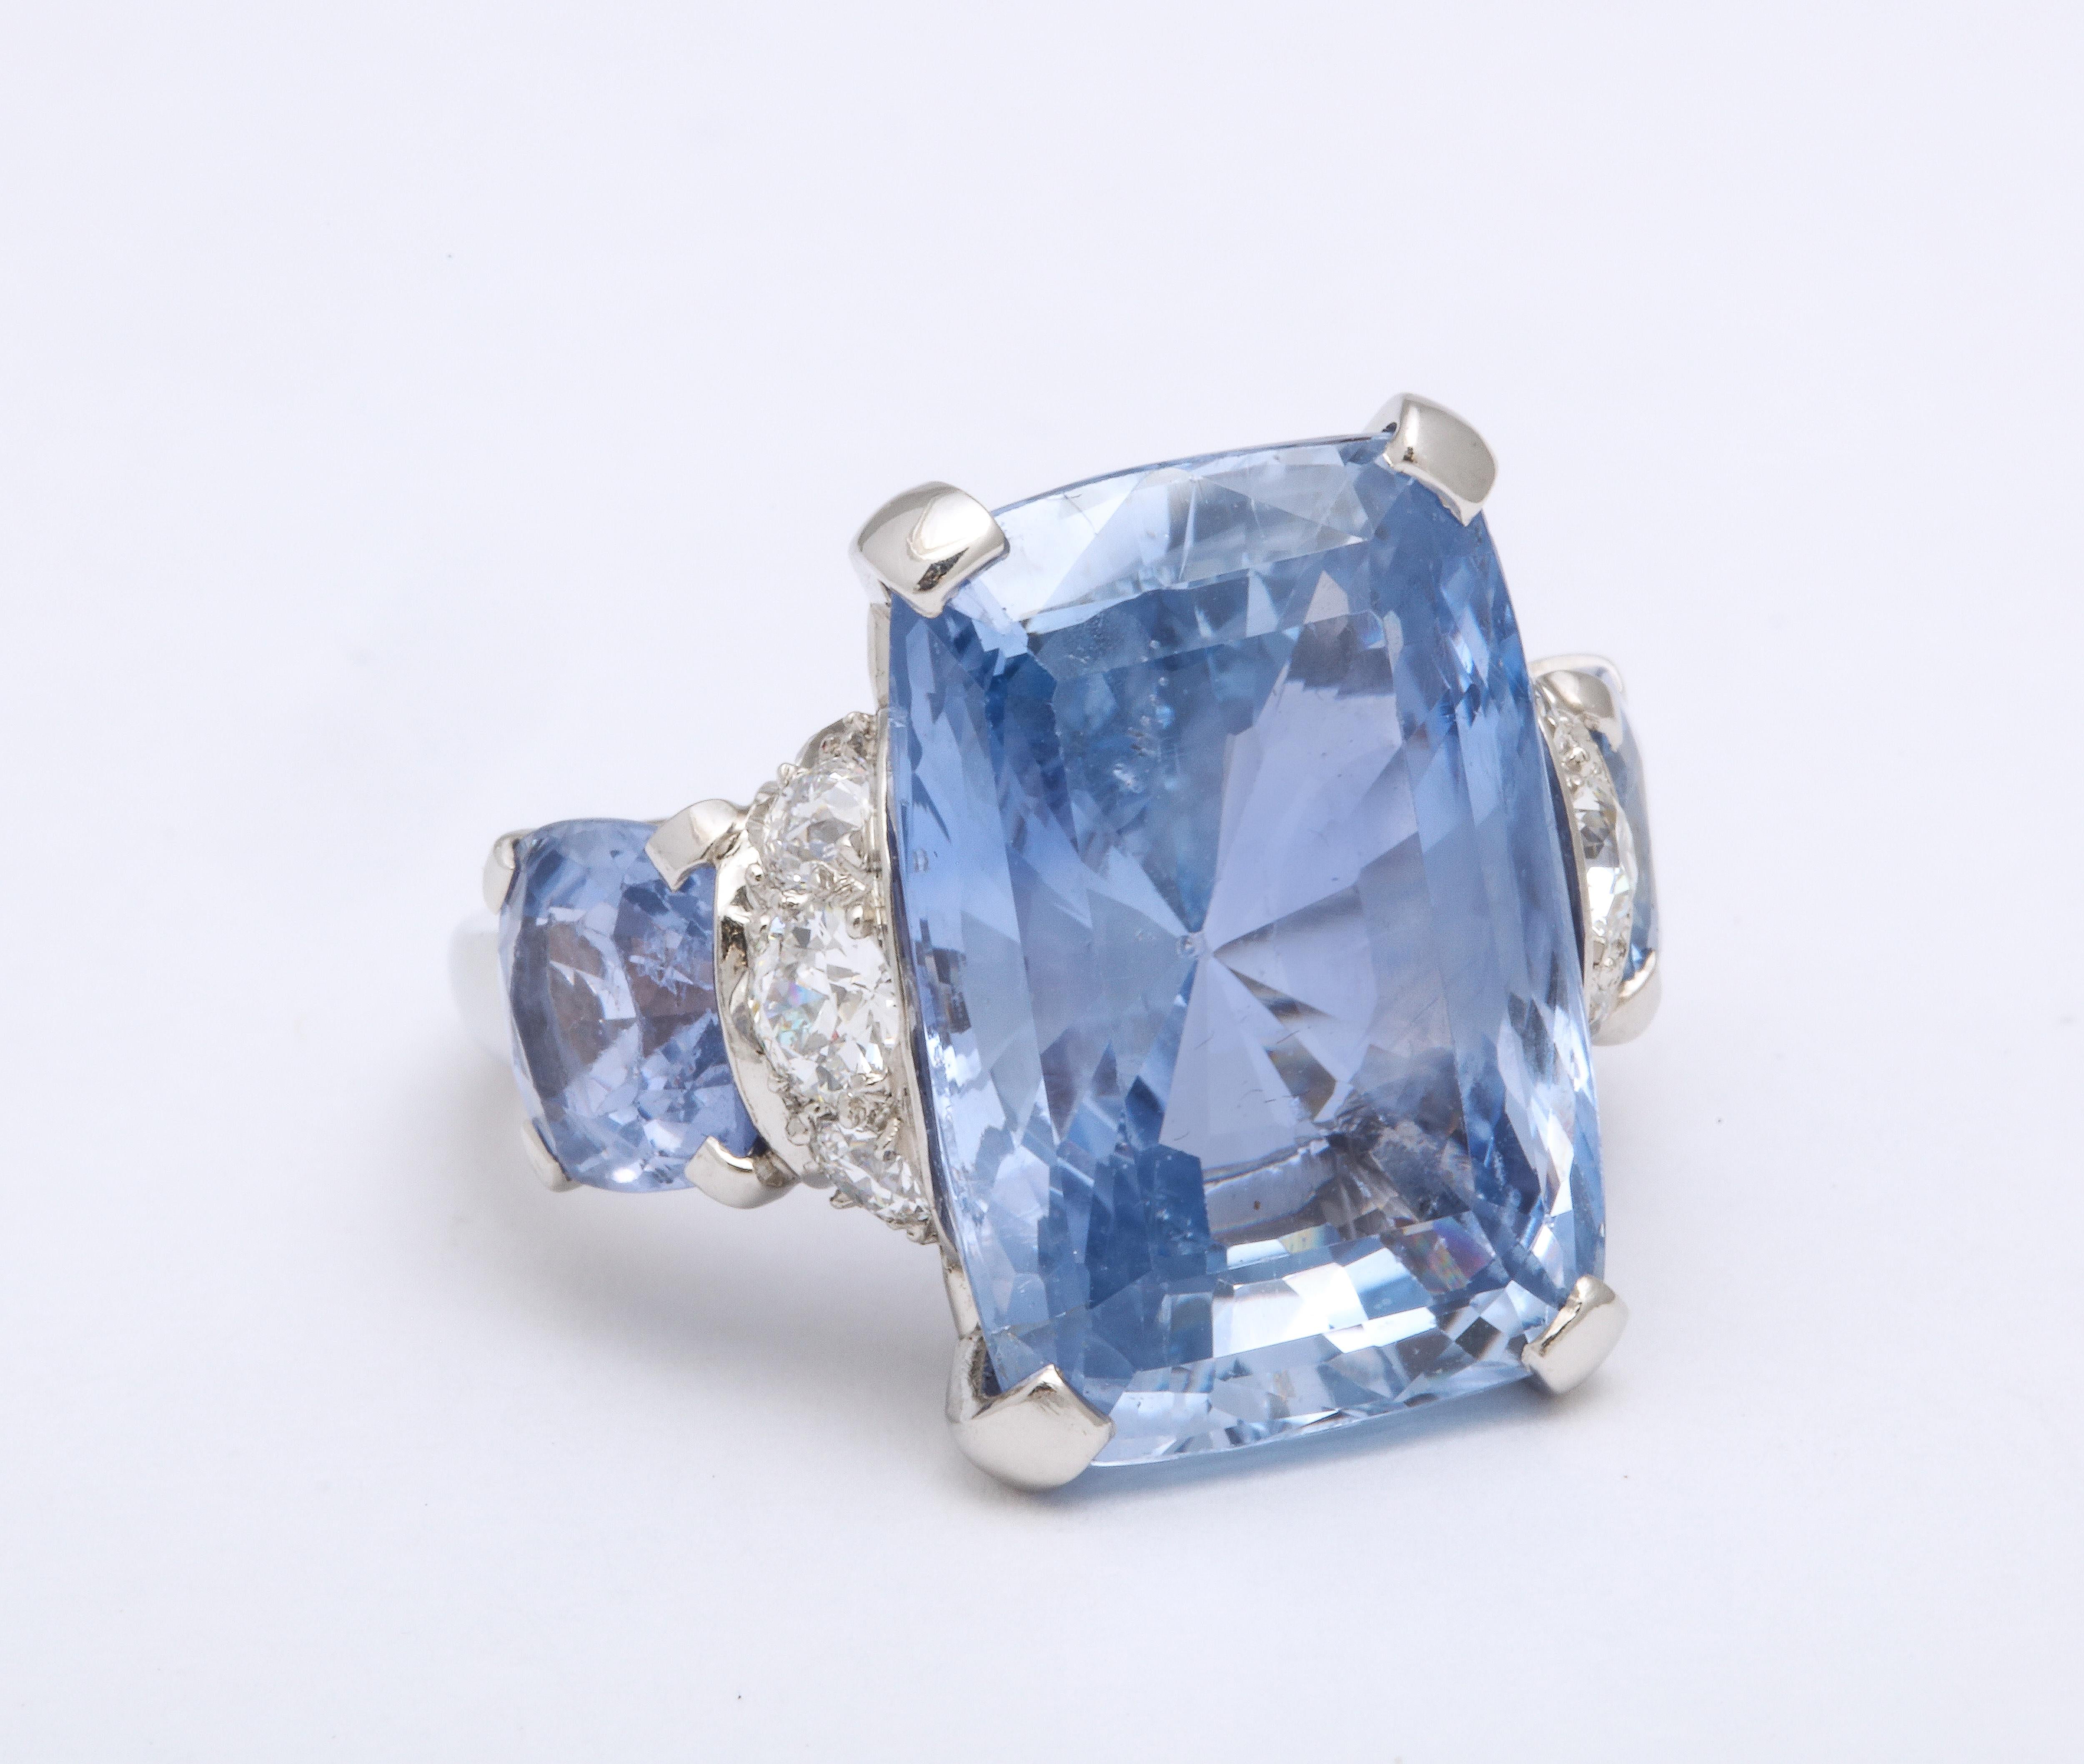 This ring is a Real Master Piece of art by Seaman Schepps.  Unbelievable approximately 30ct Ceylon Sapphire Unheated Cushion Cut Ring 

30ct center stone
6 carat total Matched pair of Ceylon Sapphire Cushion Cut Side Stones
Ring size 6 with inner